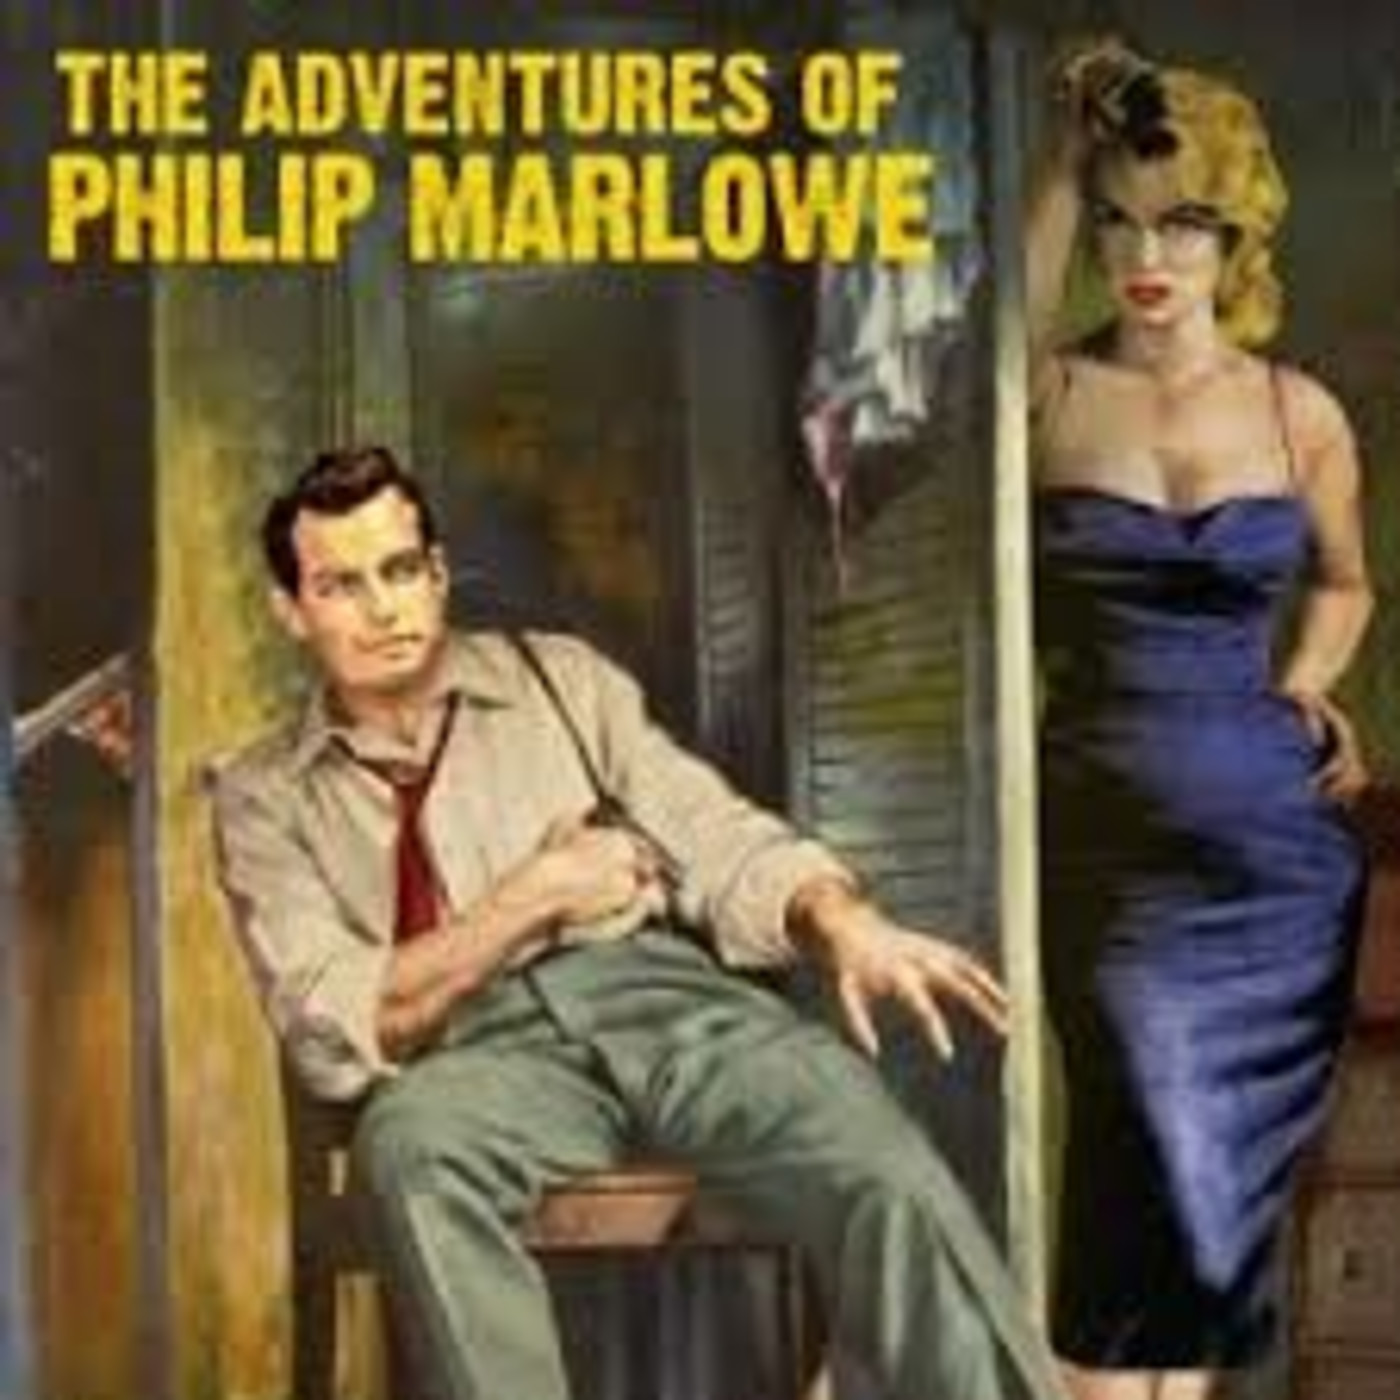 The Adventures of Philip Marlowe - The Indian Giver